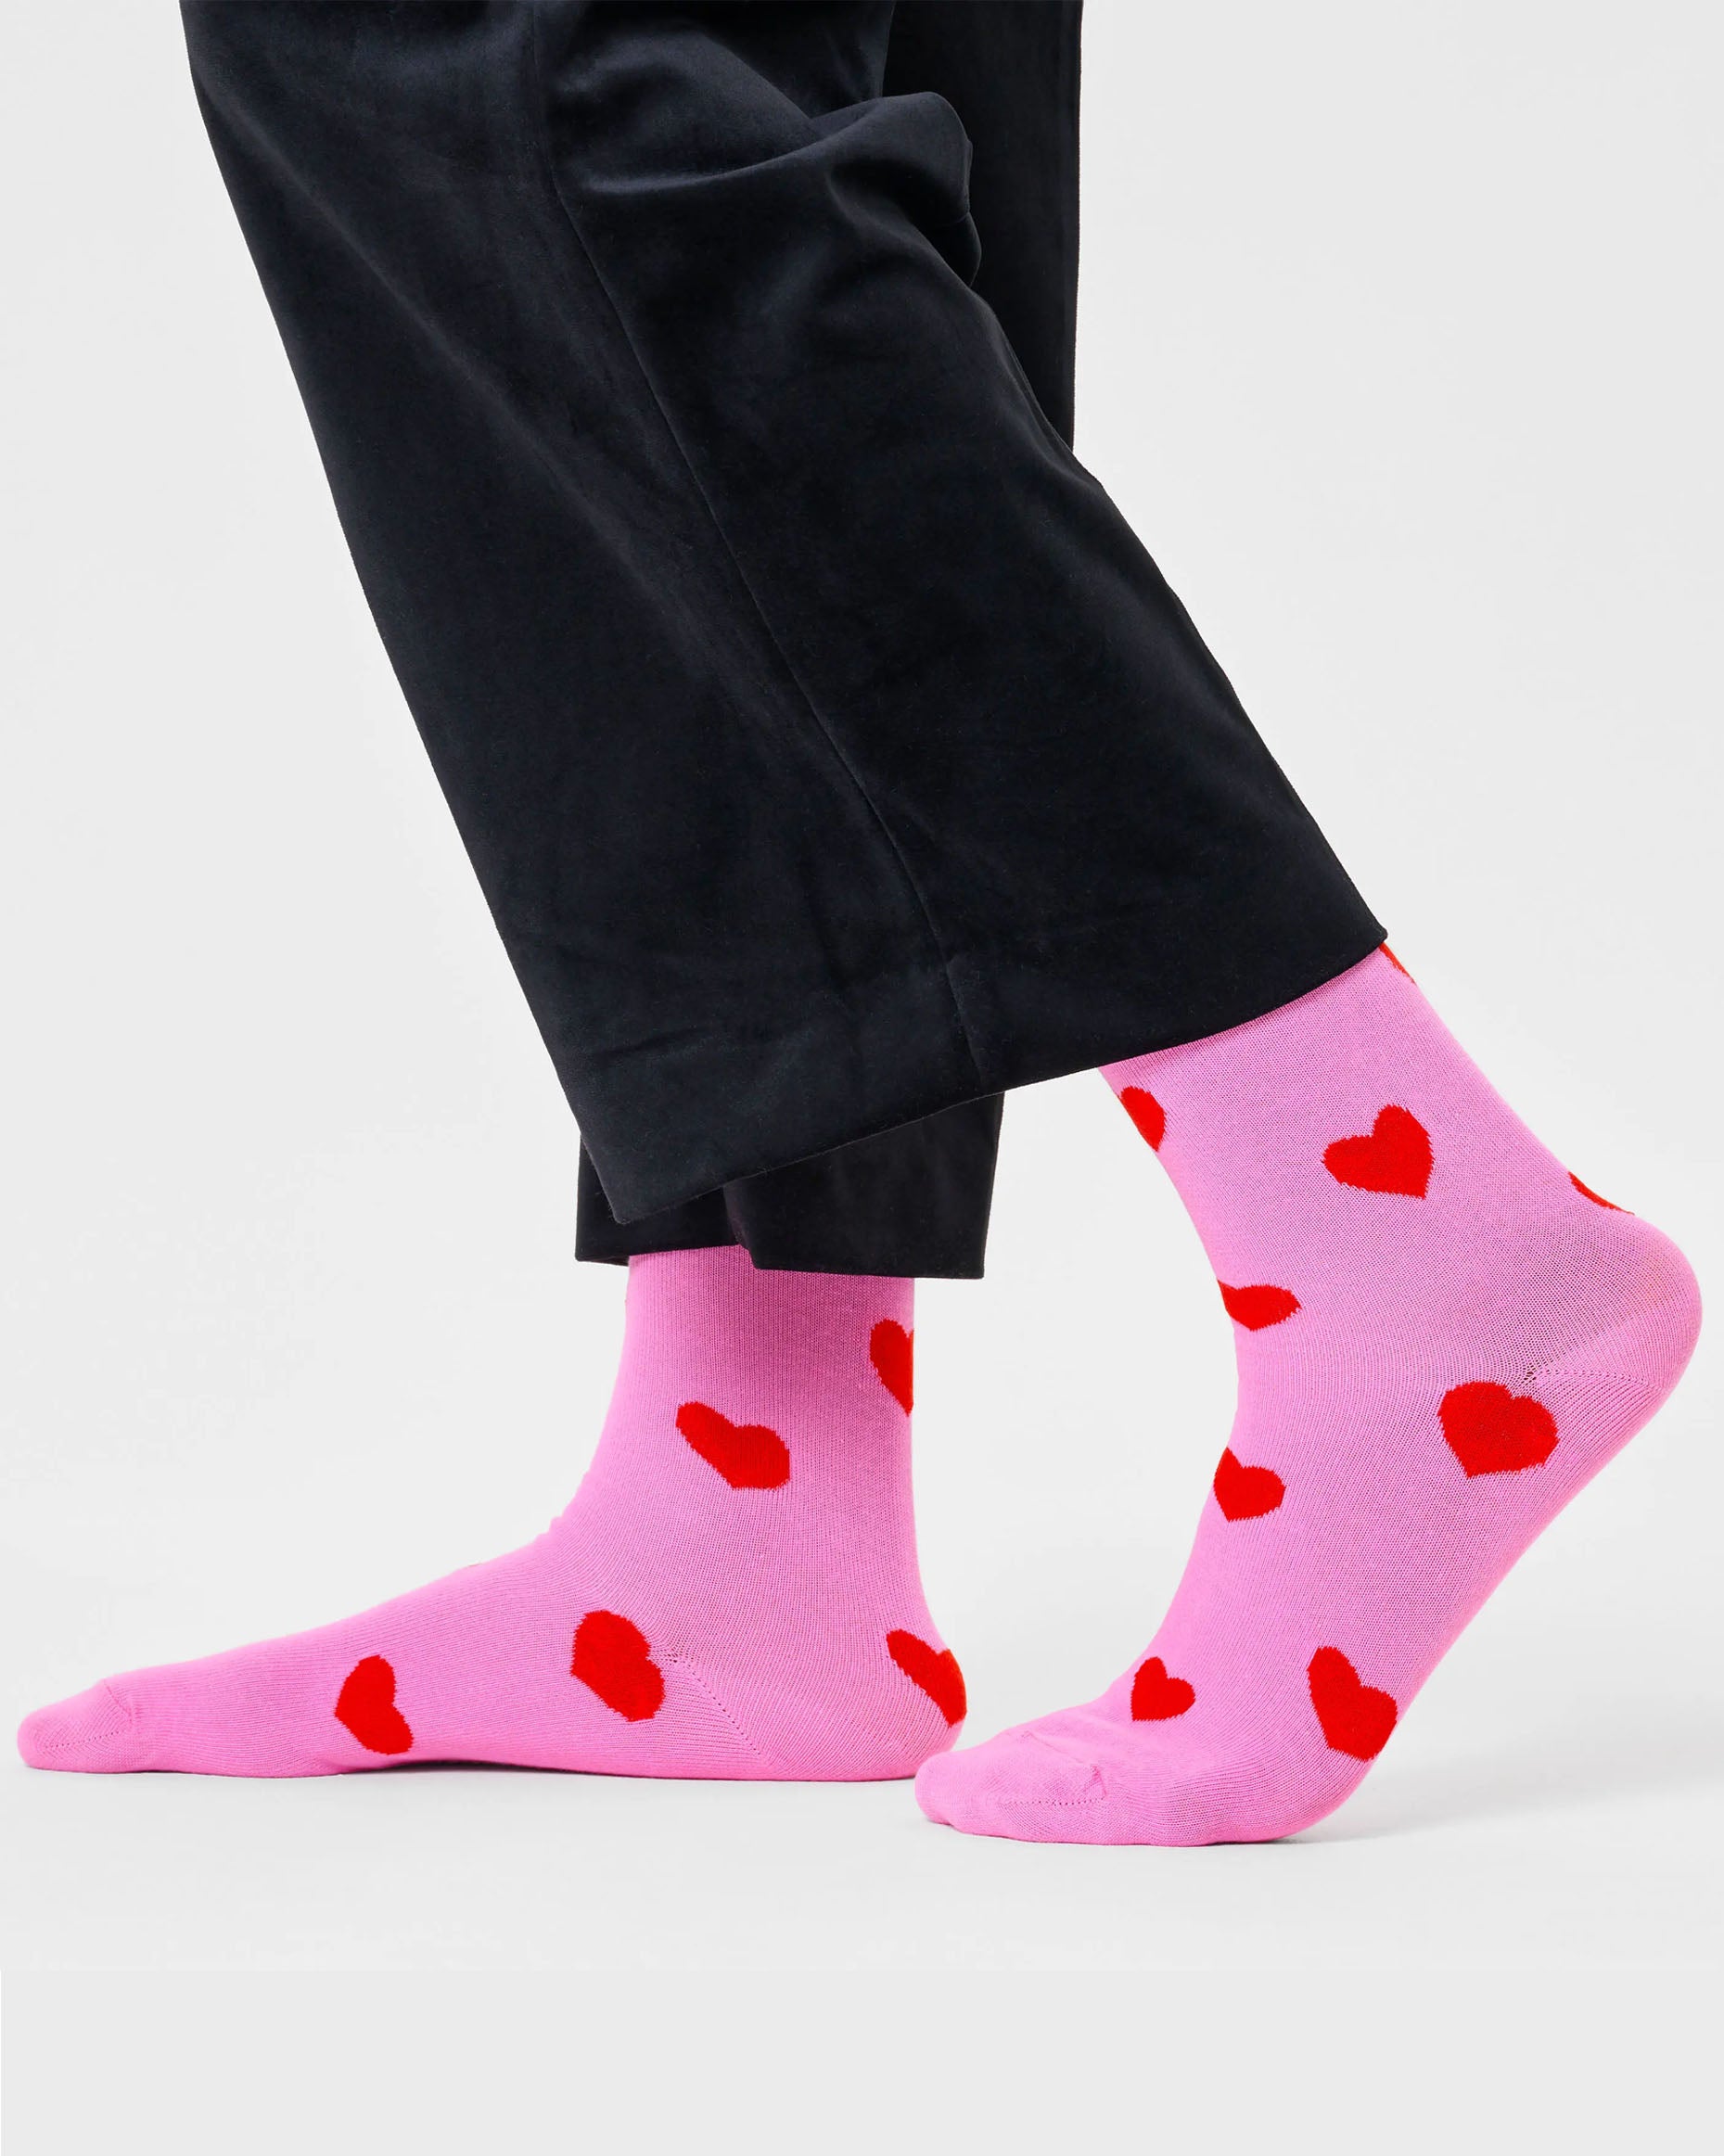 Happy Socks P000068 Heart Socks - Light pink cotton crew socks with all over red heart pattern worn with black velvet trousers. Perfect gift for Valentine's day